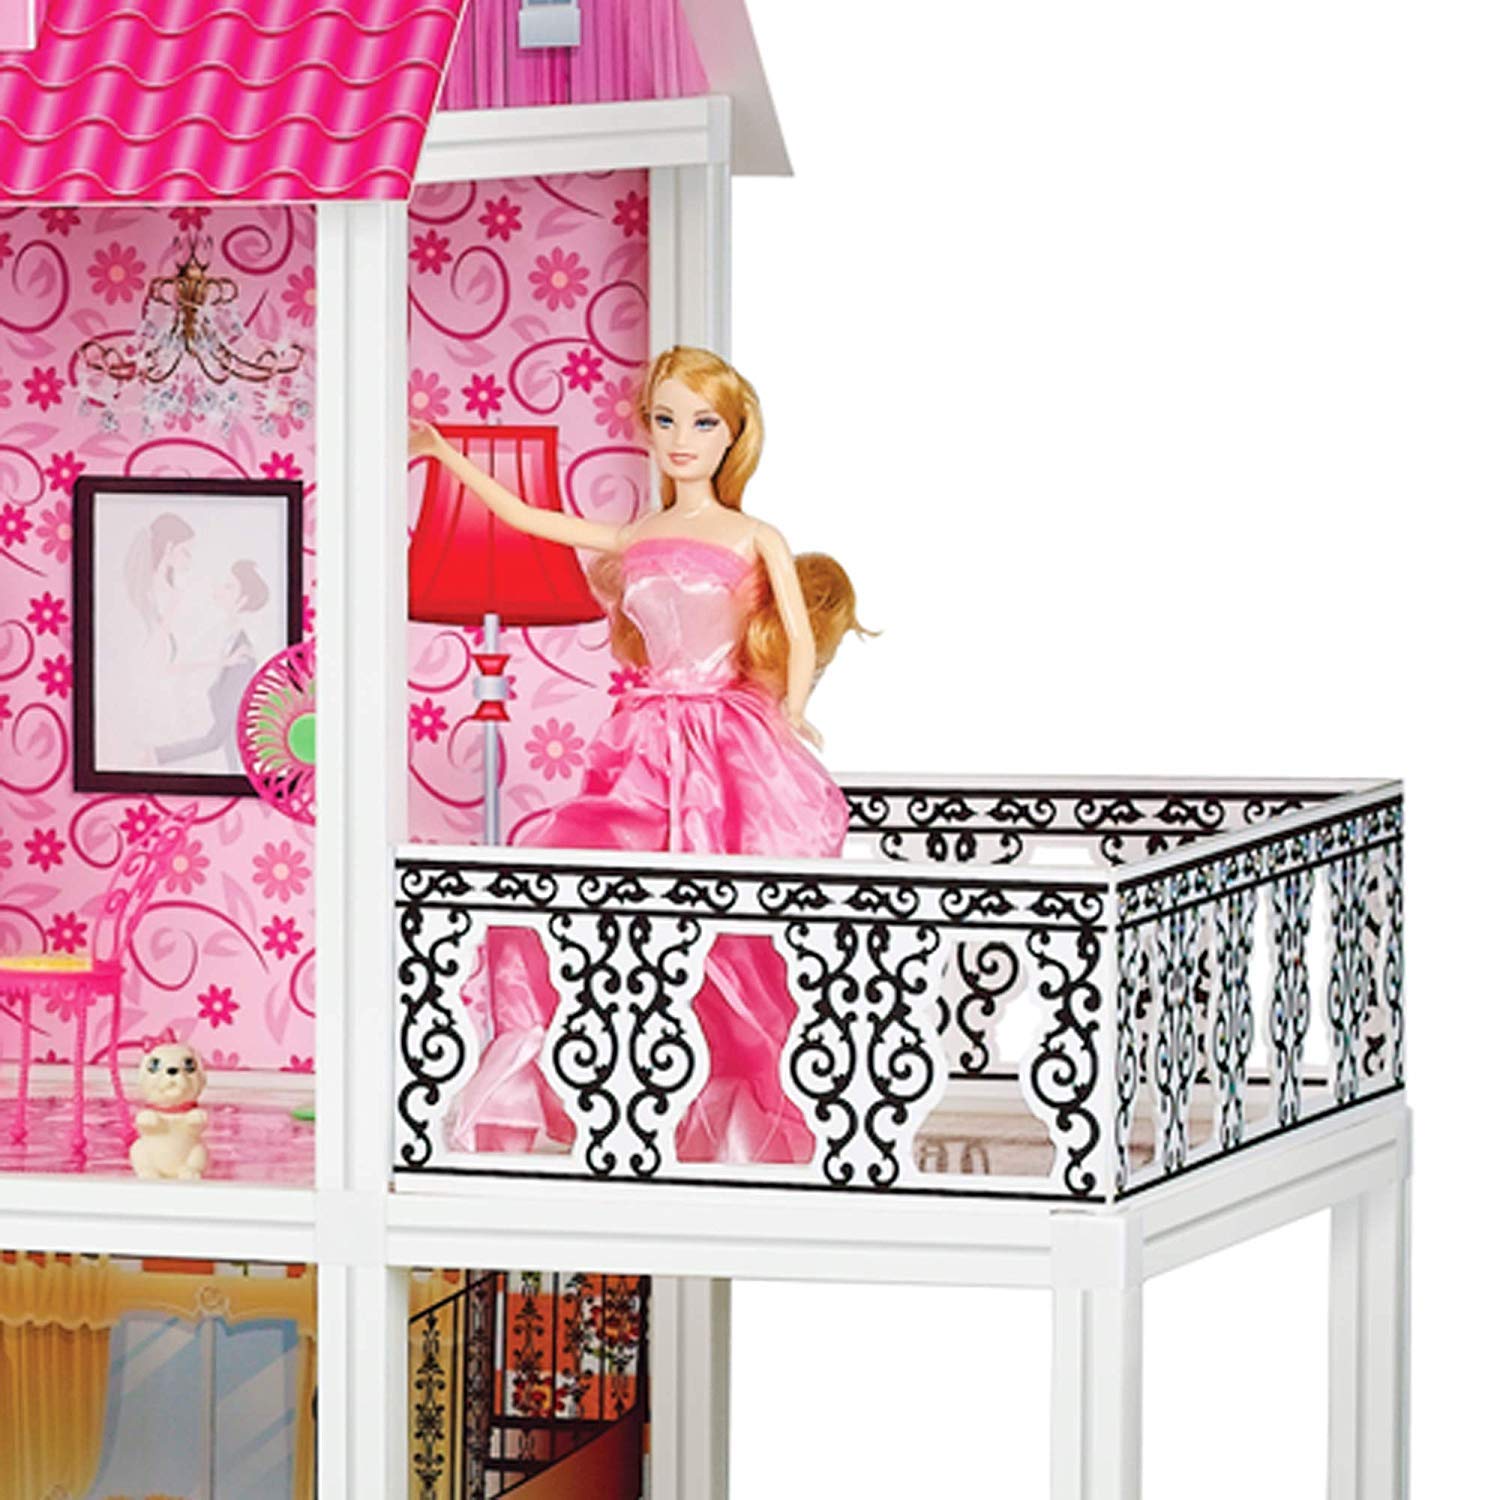 39'' Large Plastic & Hard Cardboard Dollhouse, Big Dreamhouse with Doll House Furniture, House Hold Items, Pretend Play Toys Gifts for Girls Kids Ages 3+, 4 Rooms